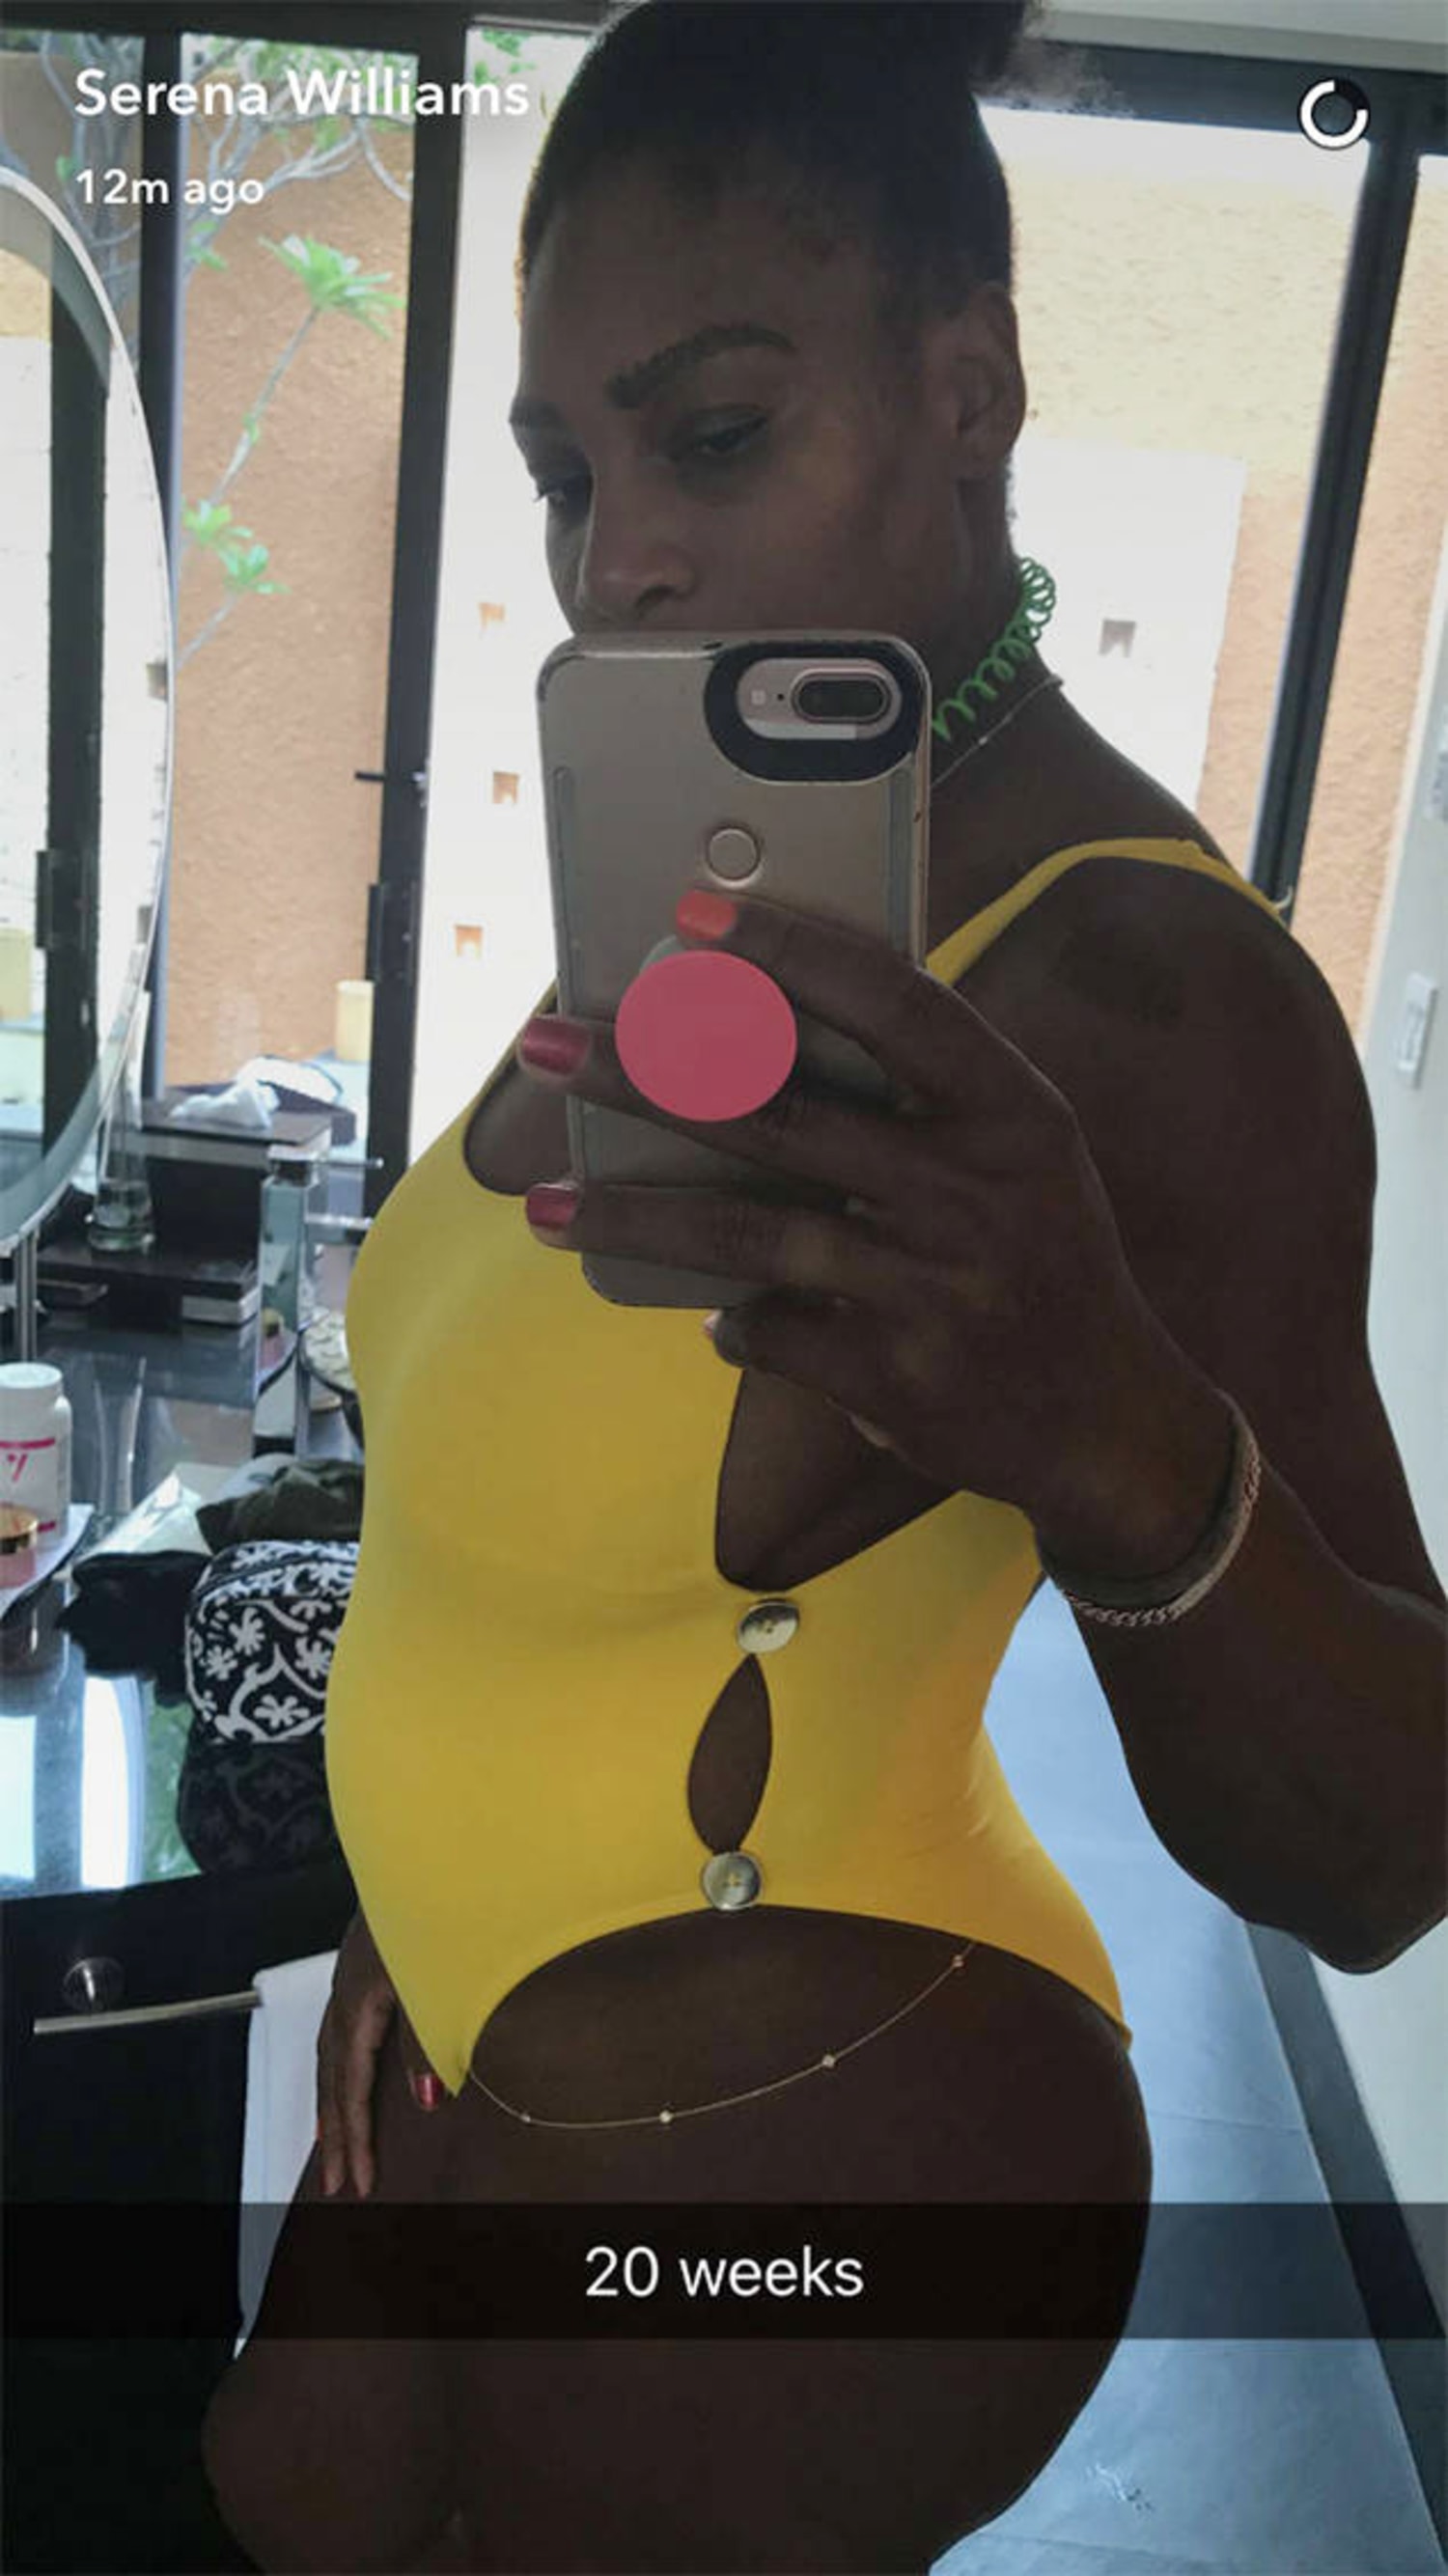 Serena Williams Announces Her Pregnancy on Snapchat